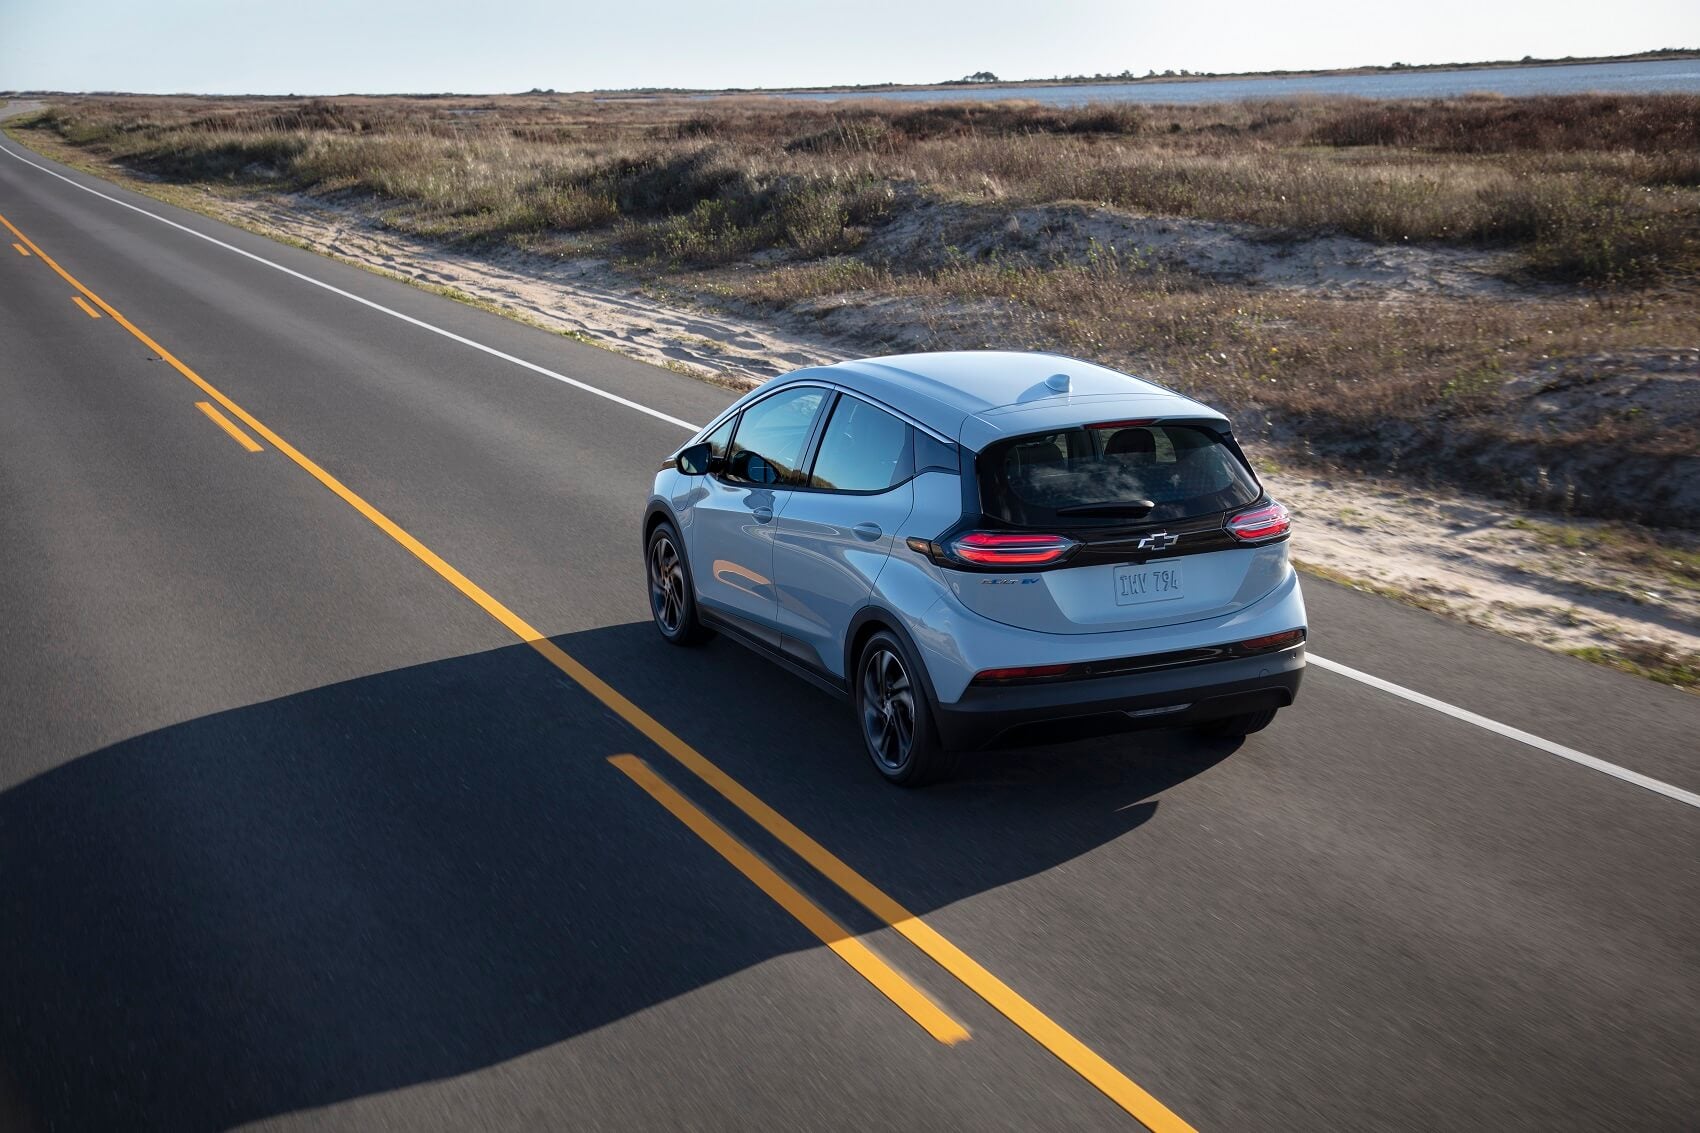 About Living with an Electric Car Like the Chevy Bolt